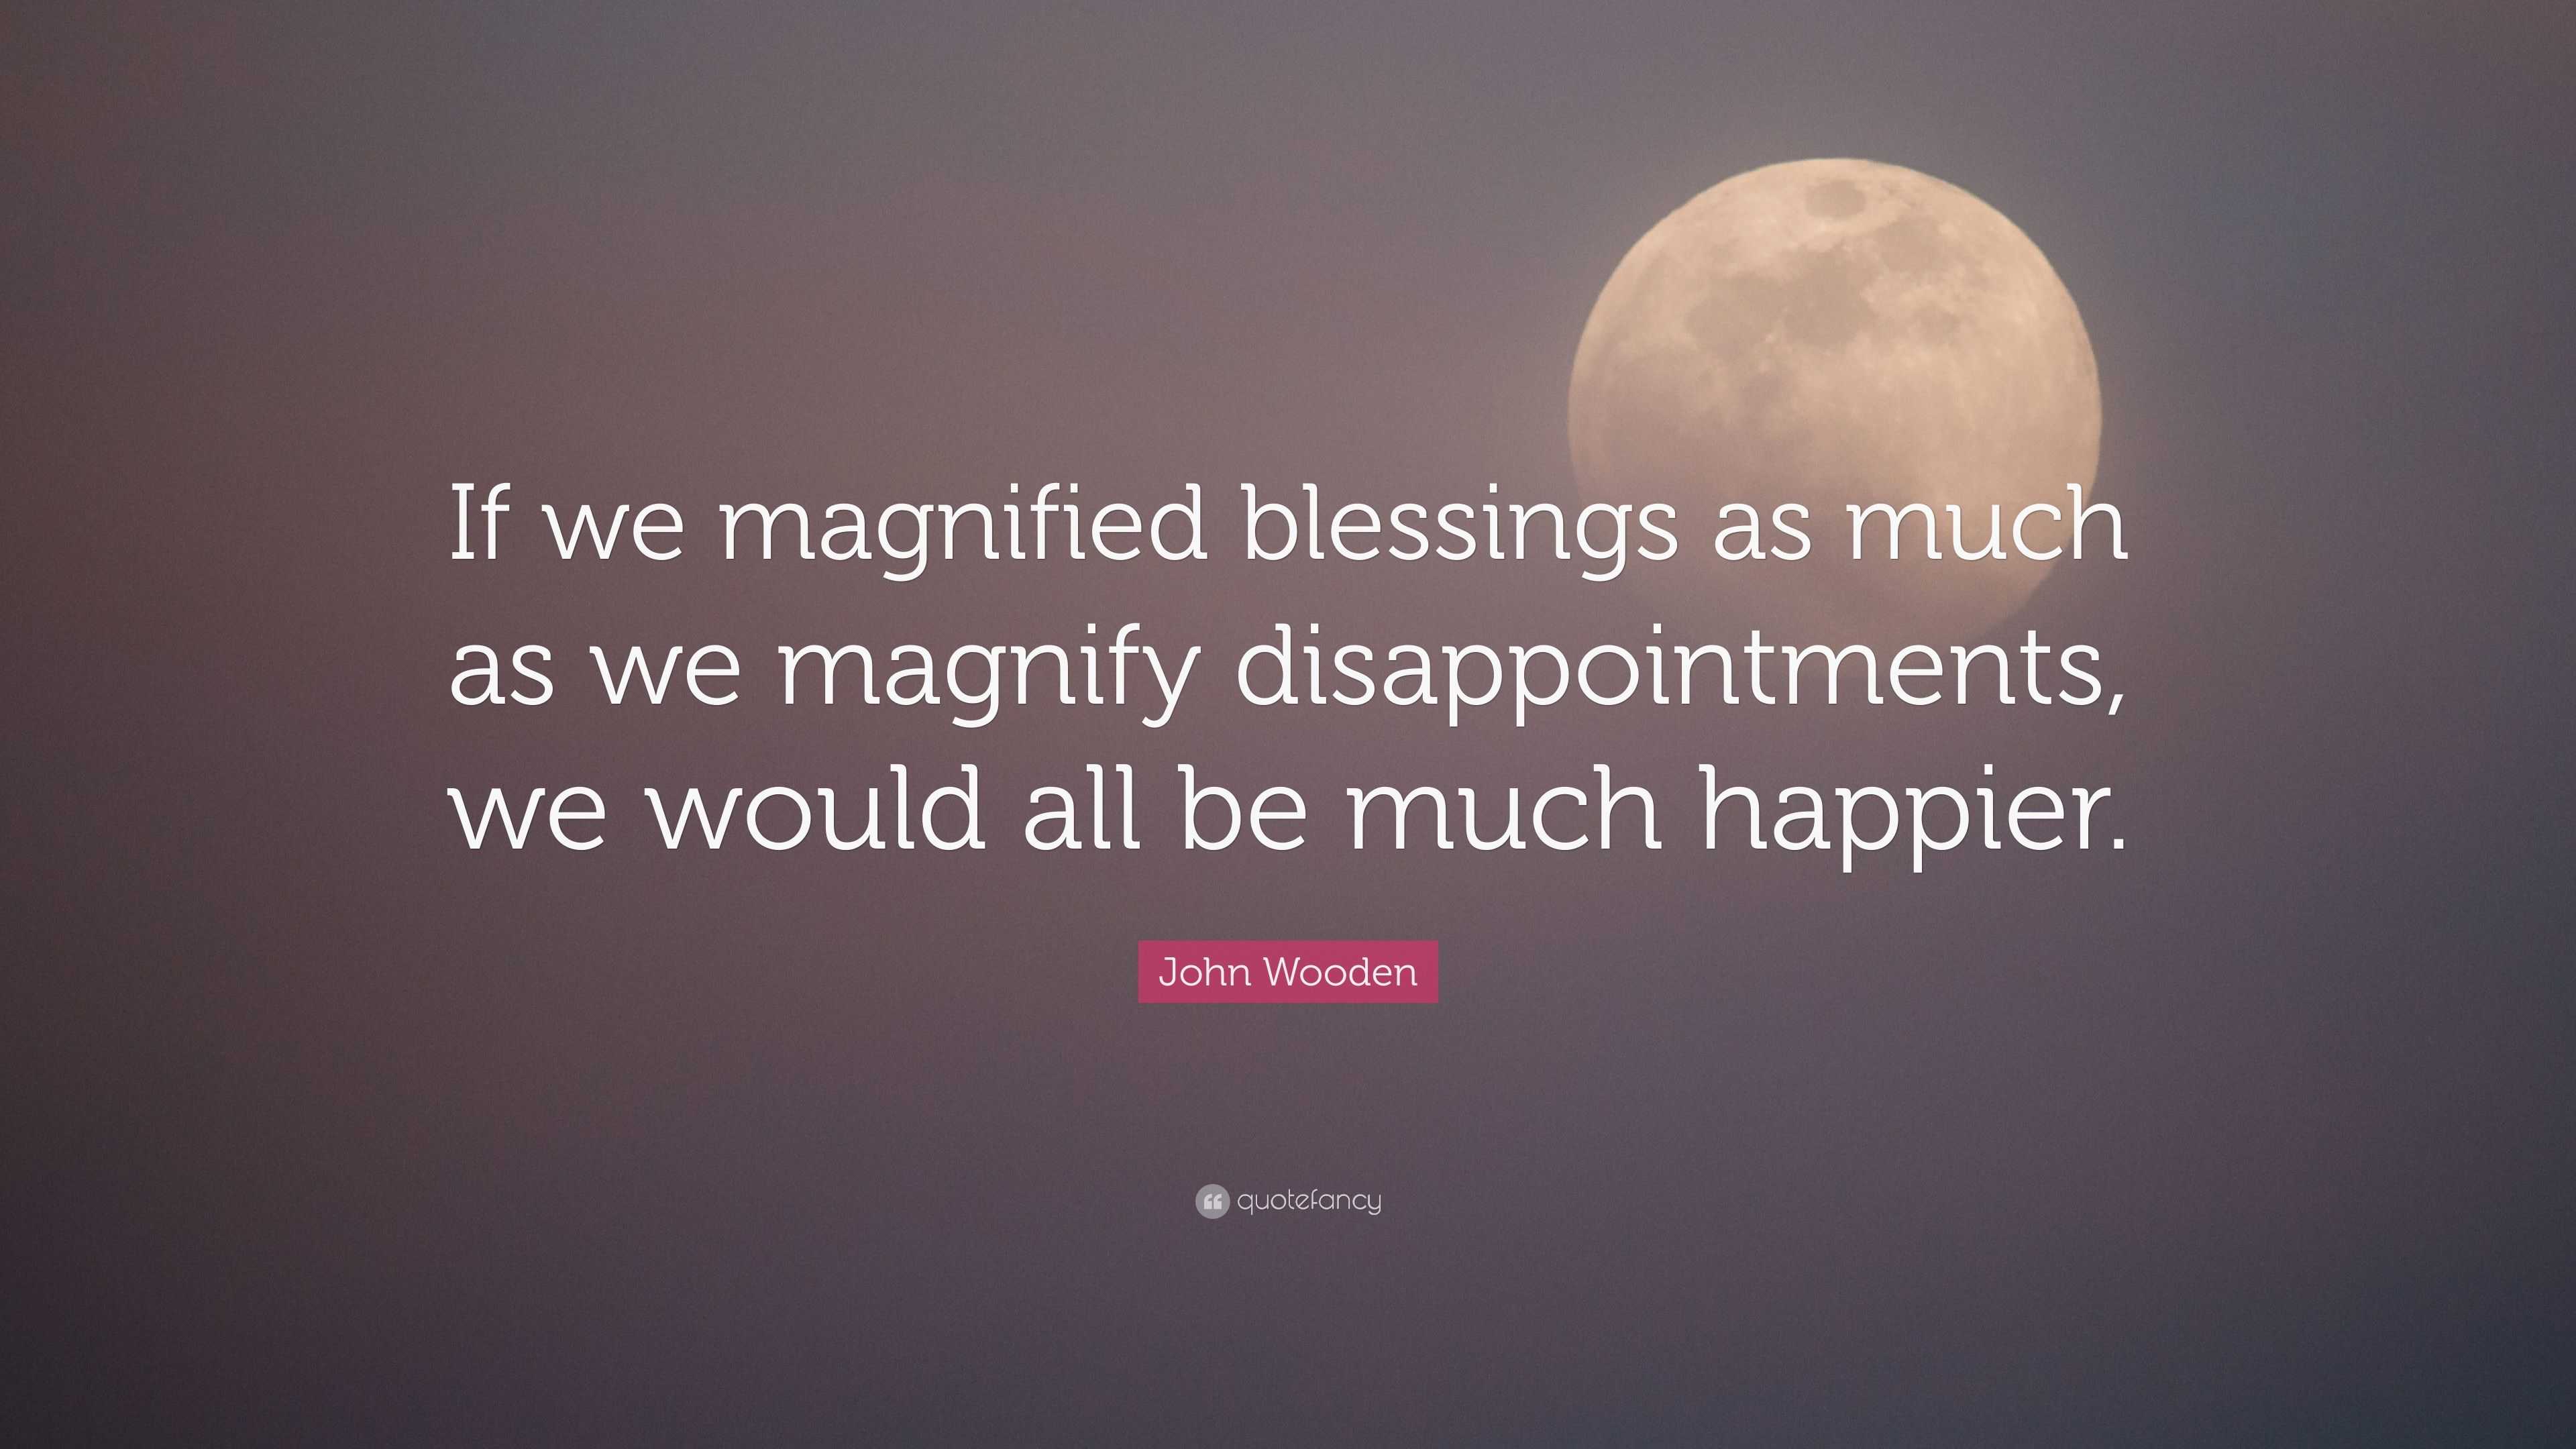 John Wooden Quote: “If we magnified blessings as much as we magnify ...